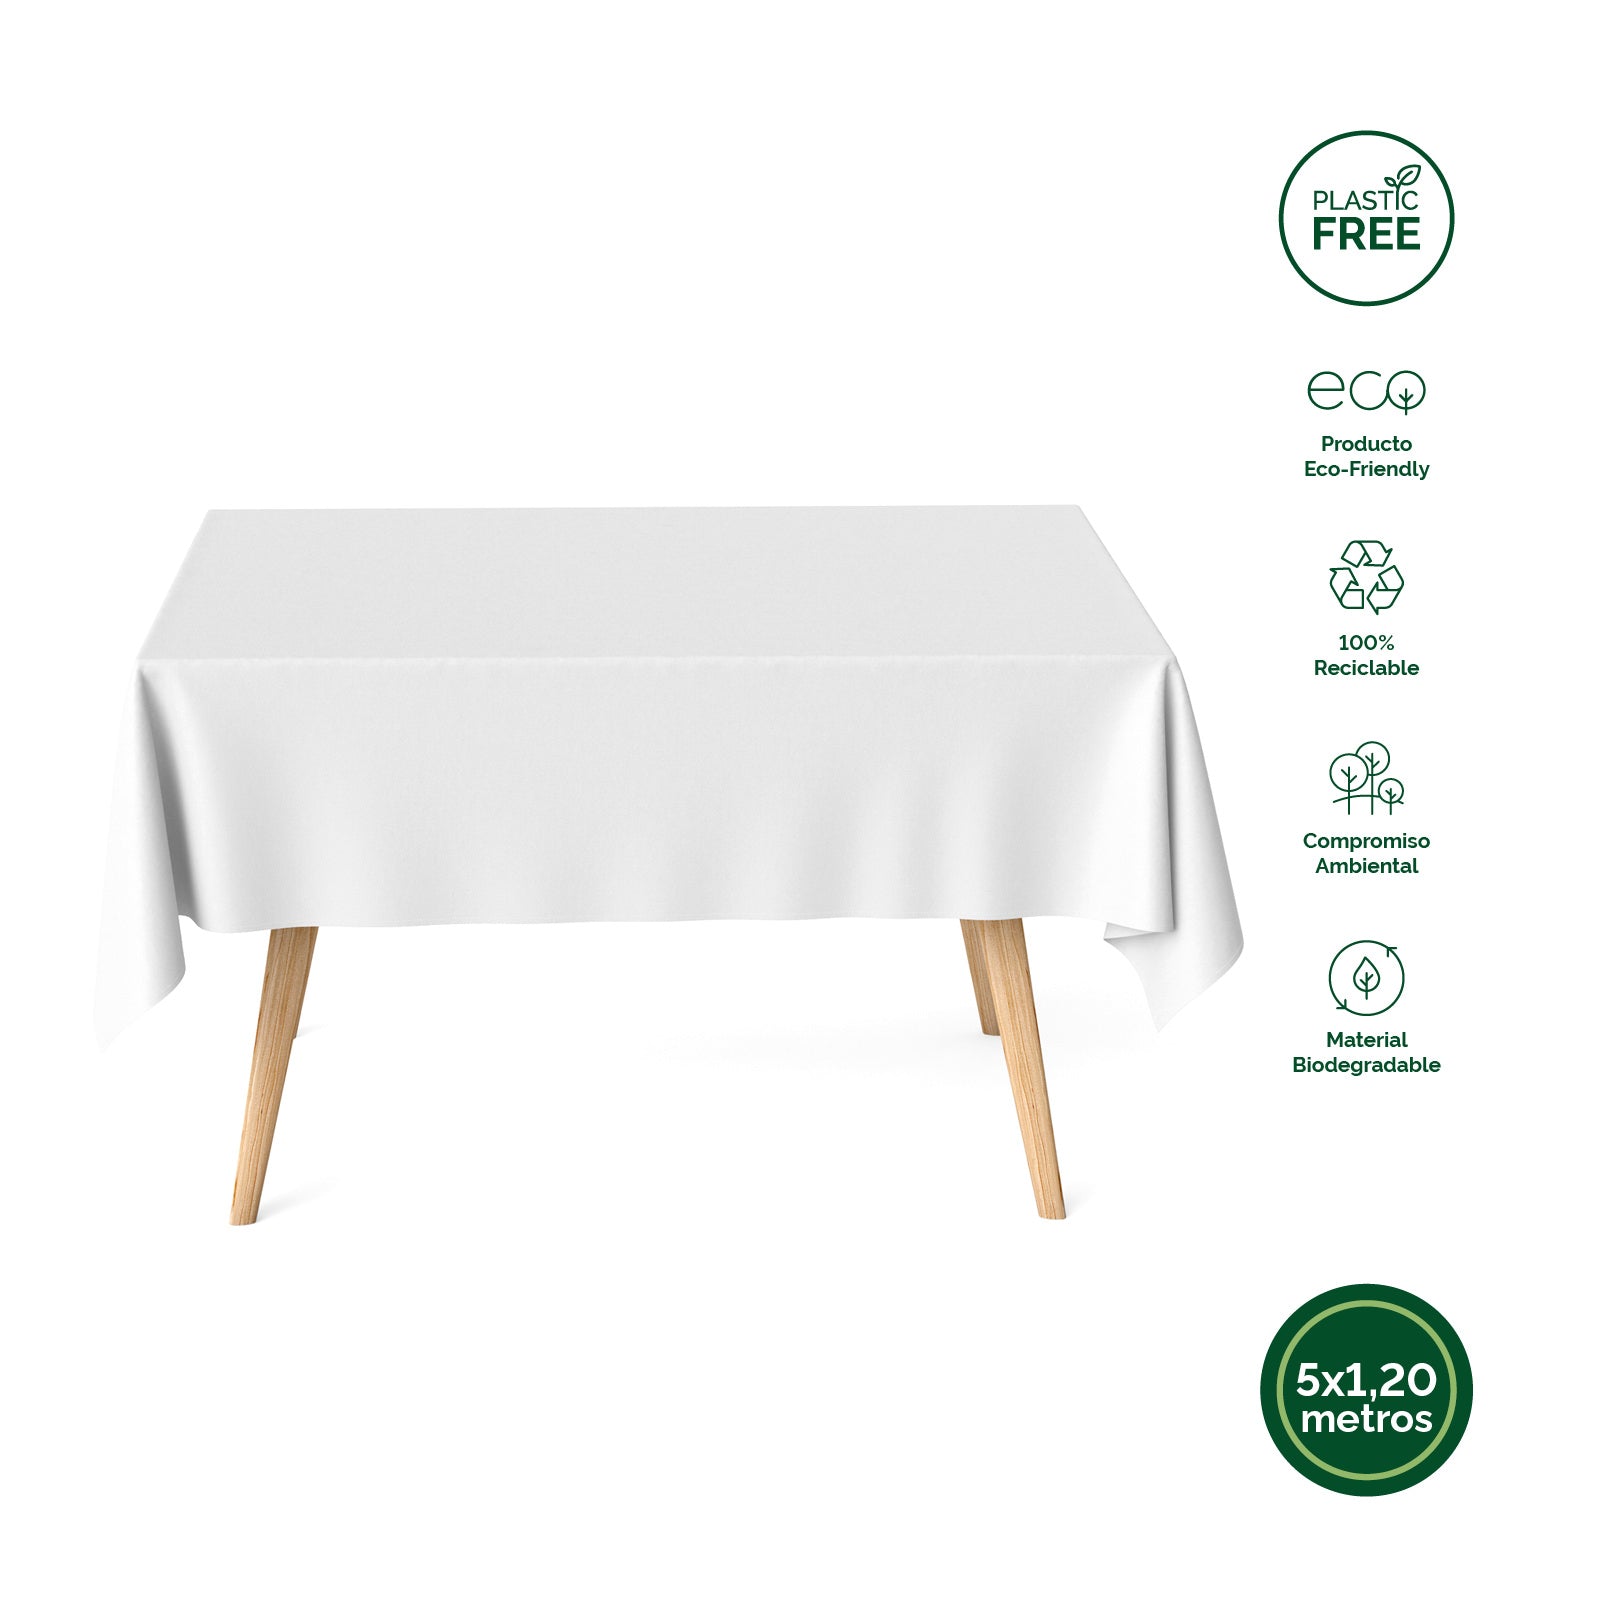 Ecological tablecloth 1.20 x 5 m white